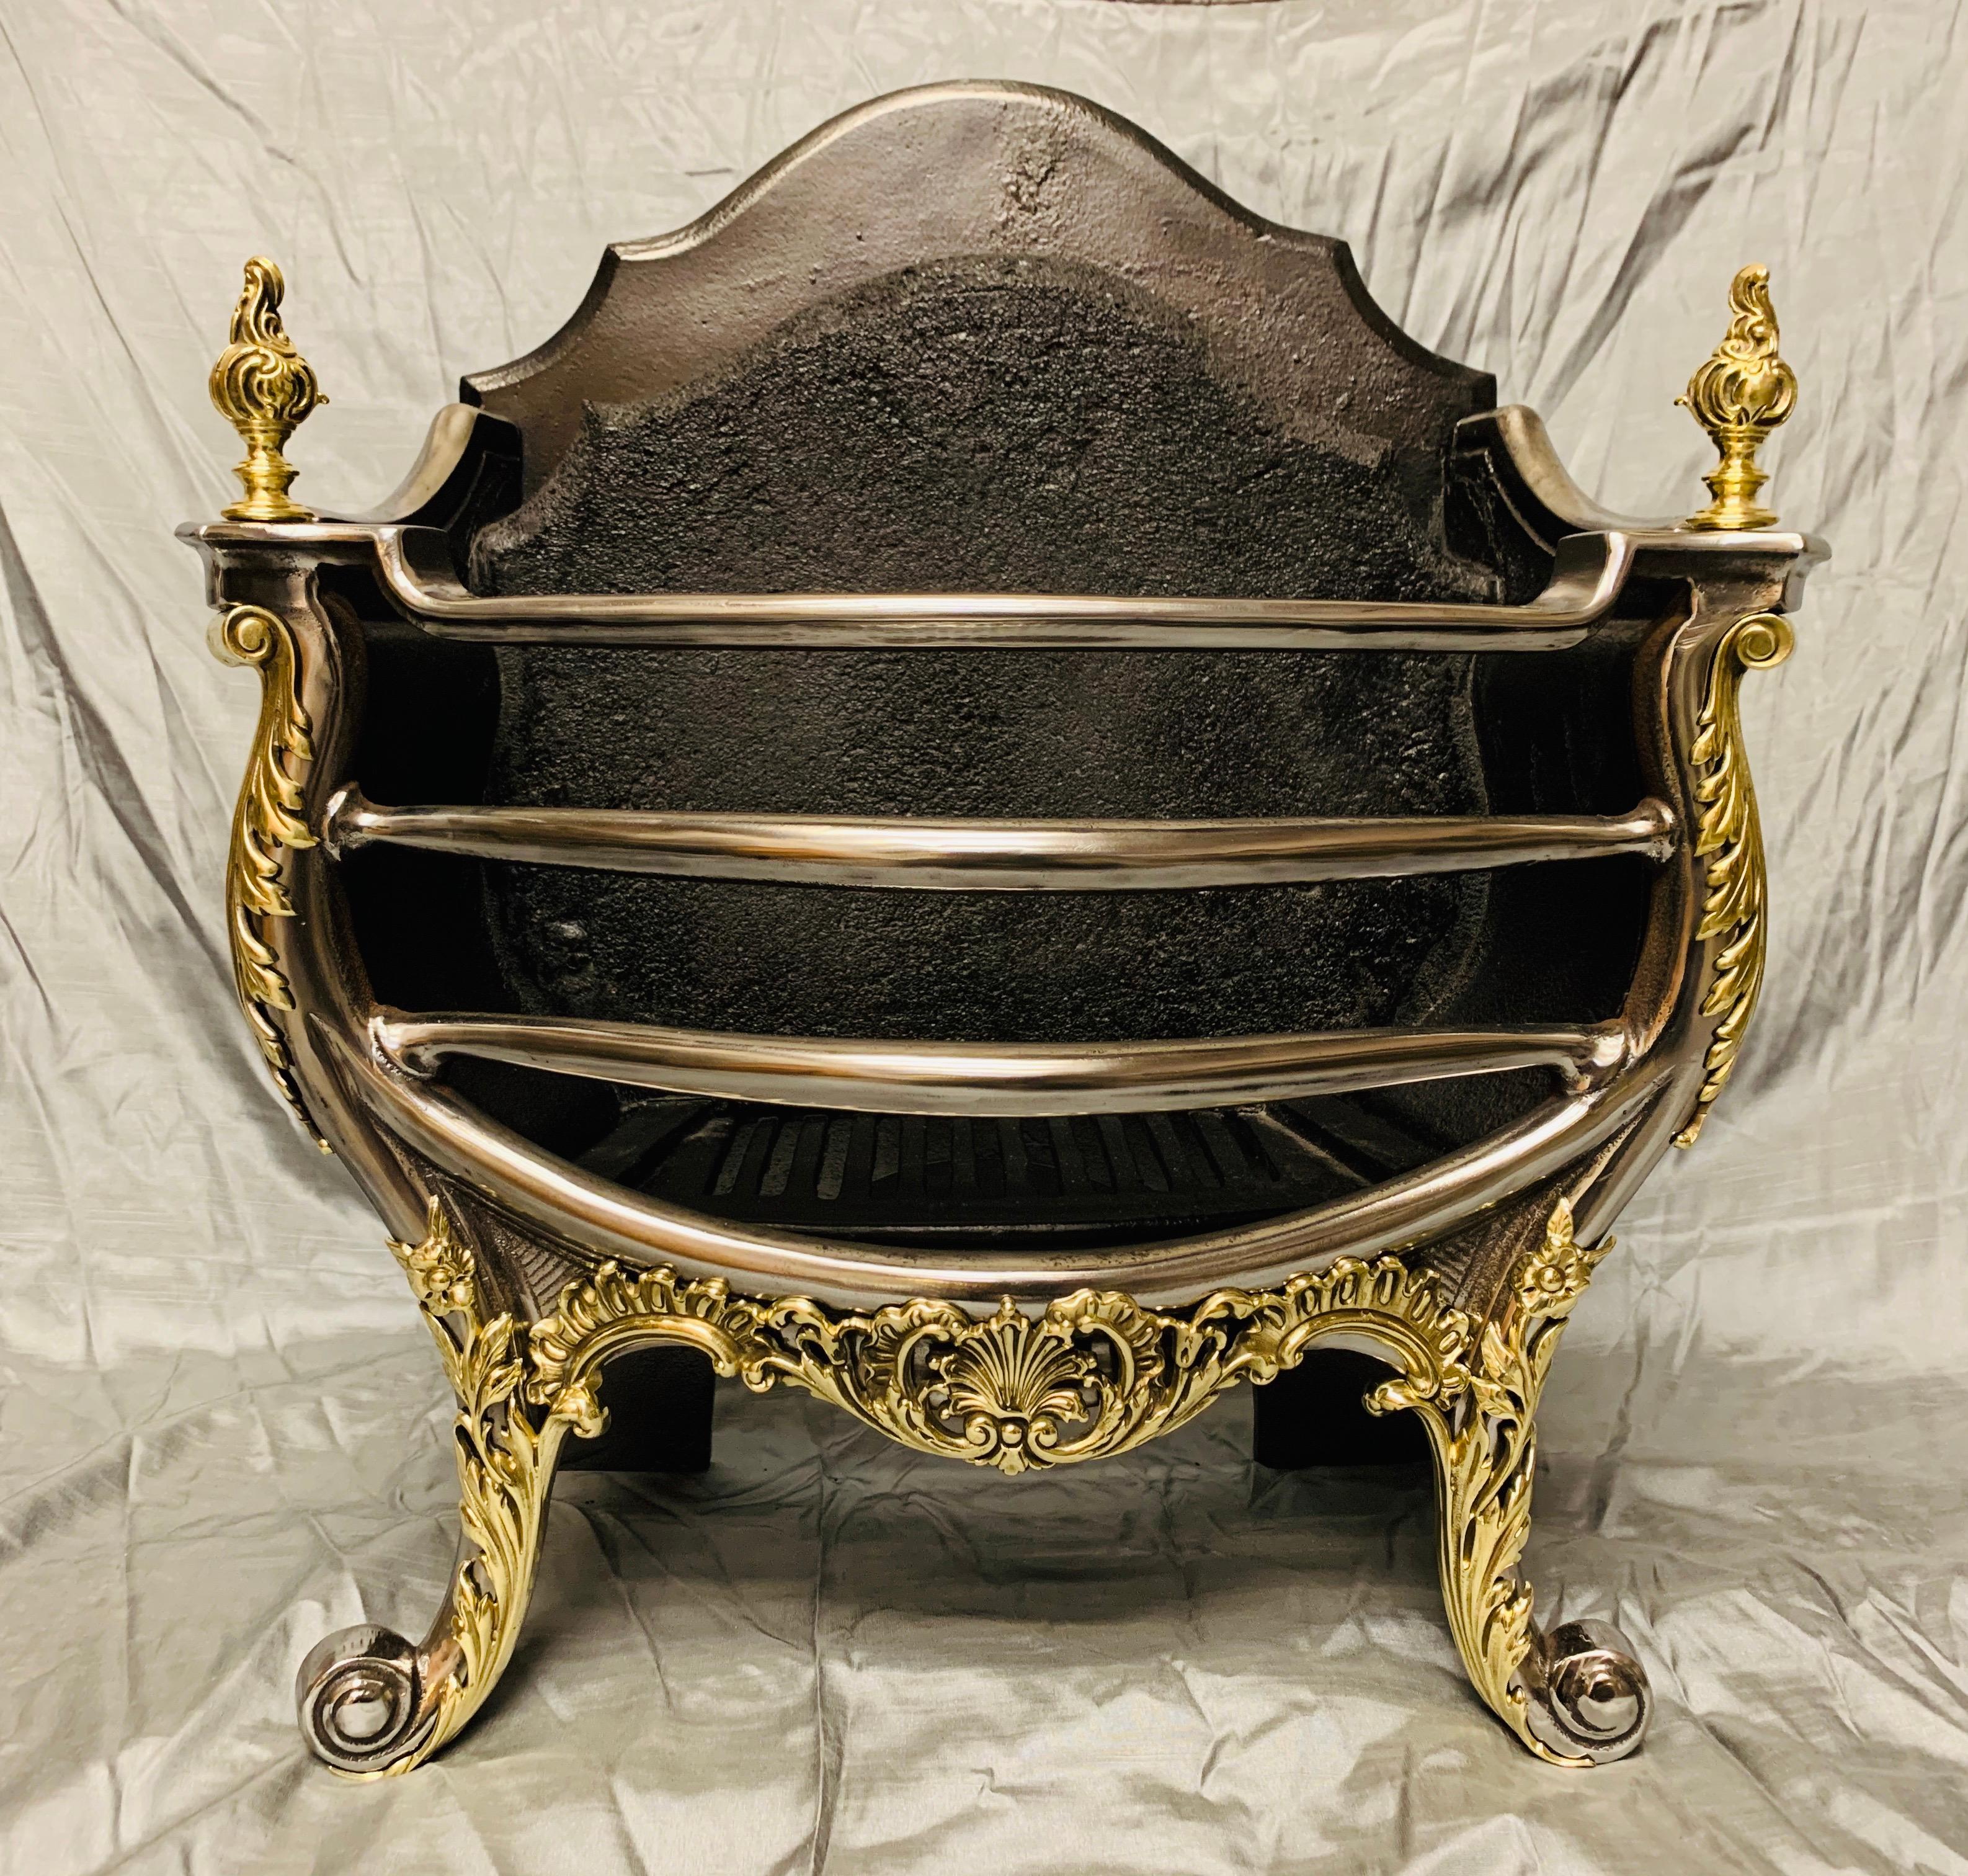 A completely original 19th century Victorian polished cast iron and mounted polished brass fire basket grate in the Rococo style. A shaped high back complete with its original fire stone, with a four bar serpentine polished grate front topped by